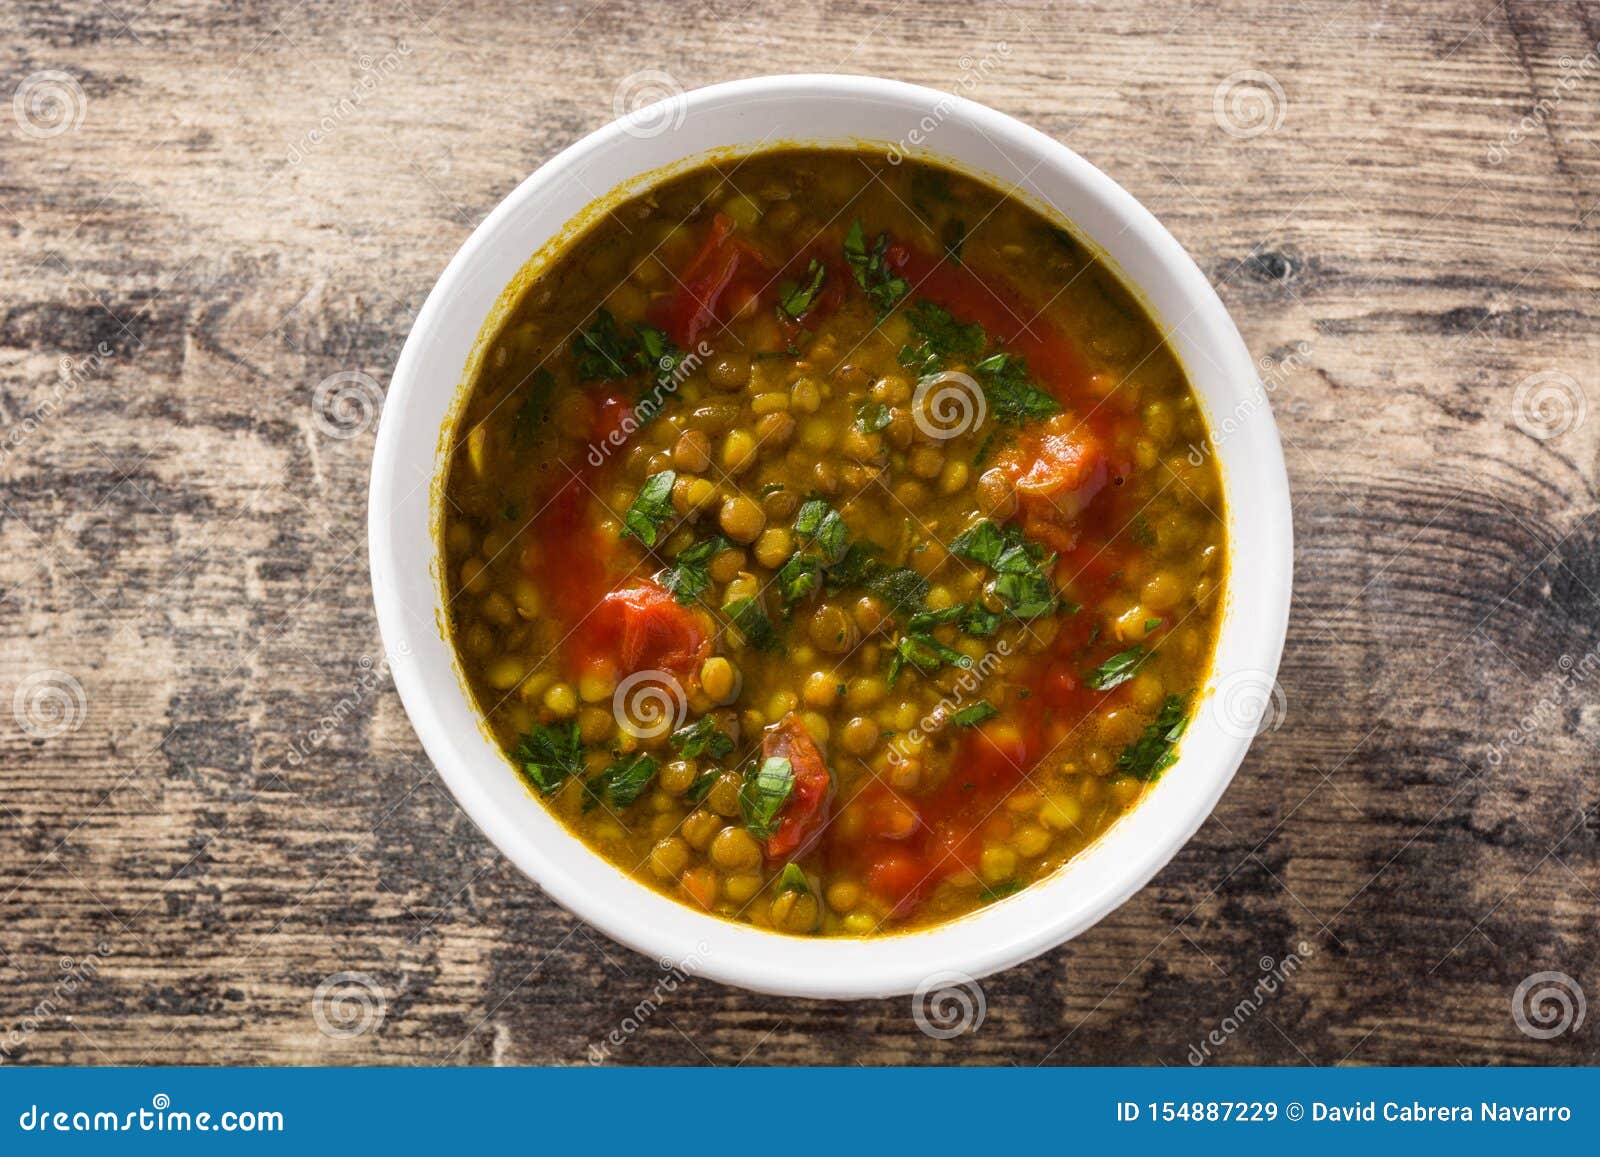 Indian Lentil Soup Dal Dhal in a Bowl on Wooden Table. Stock Image ...